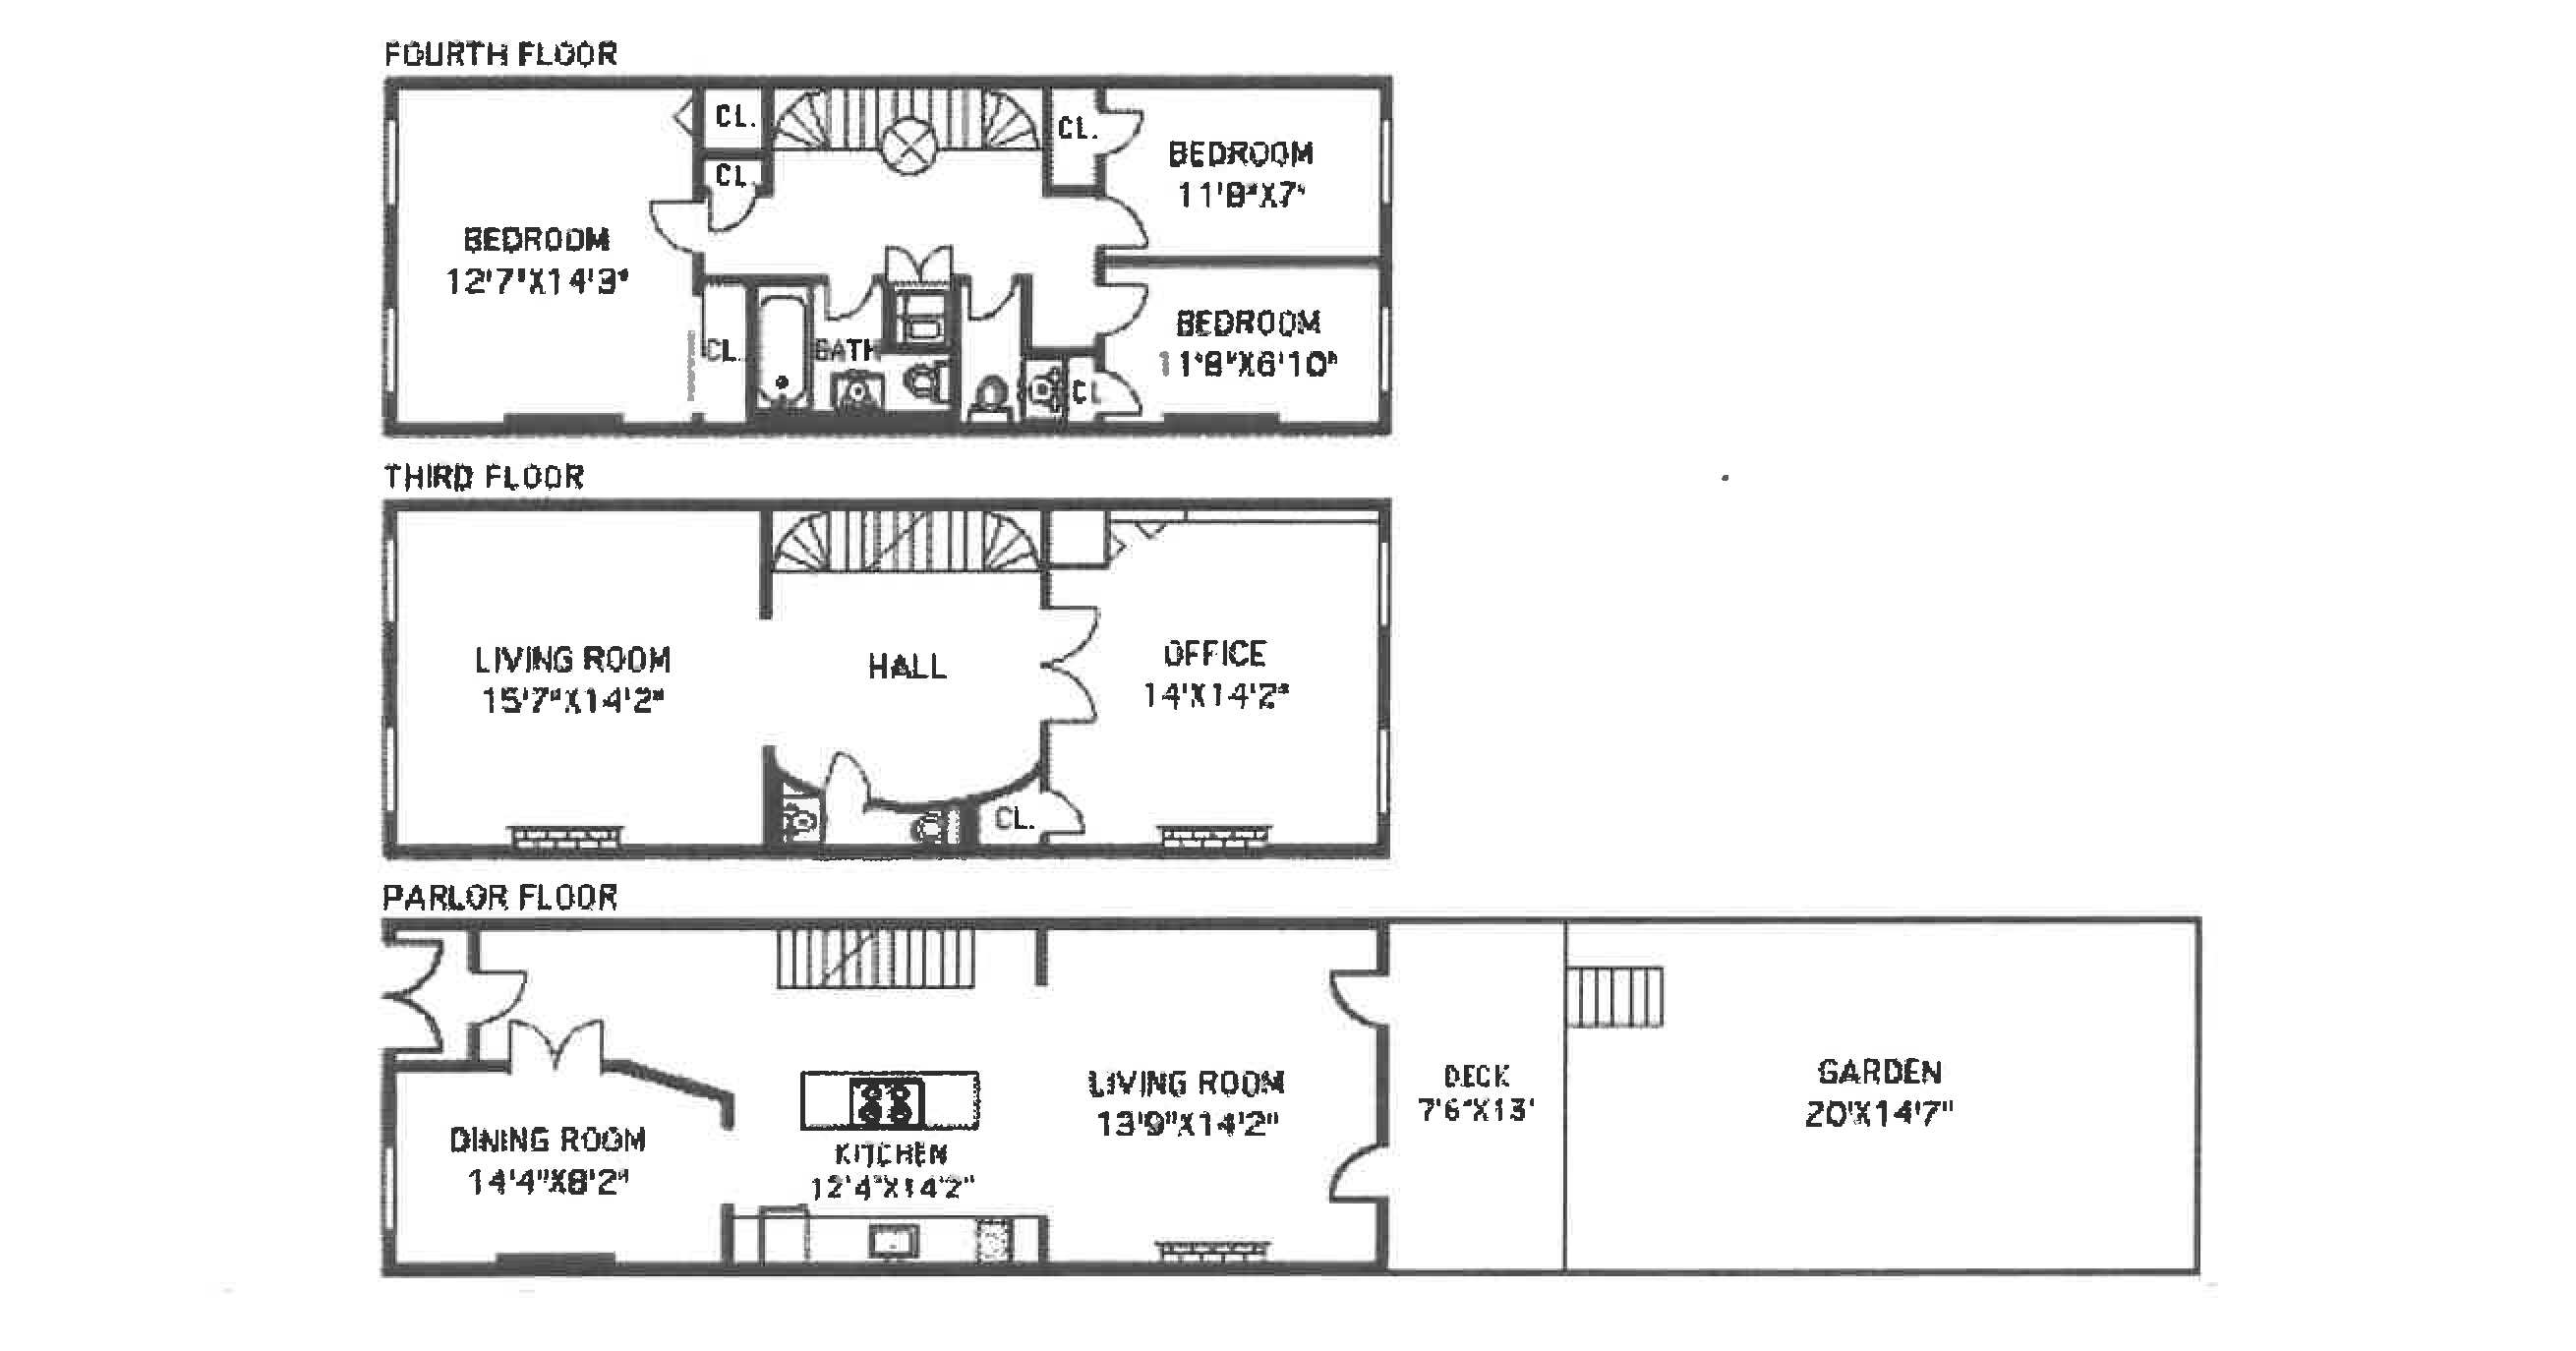 floor plan showing three floors with kitchen on parlor level